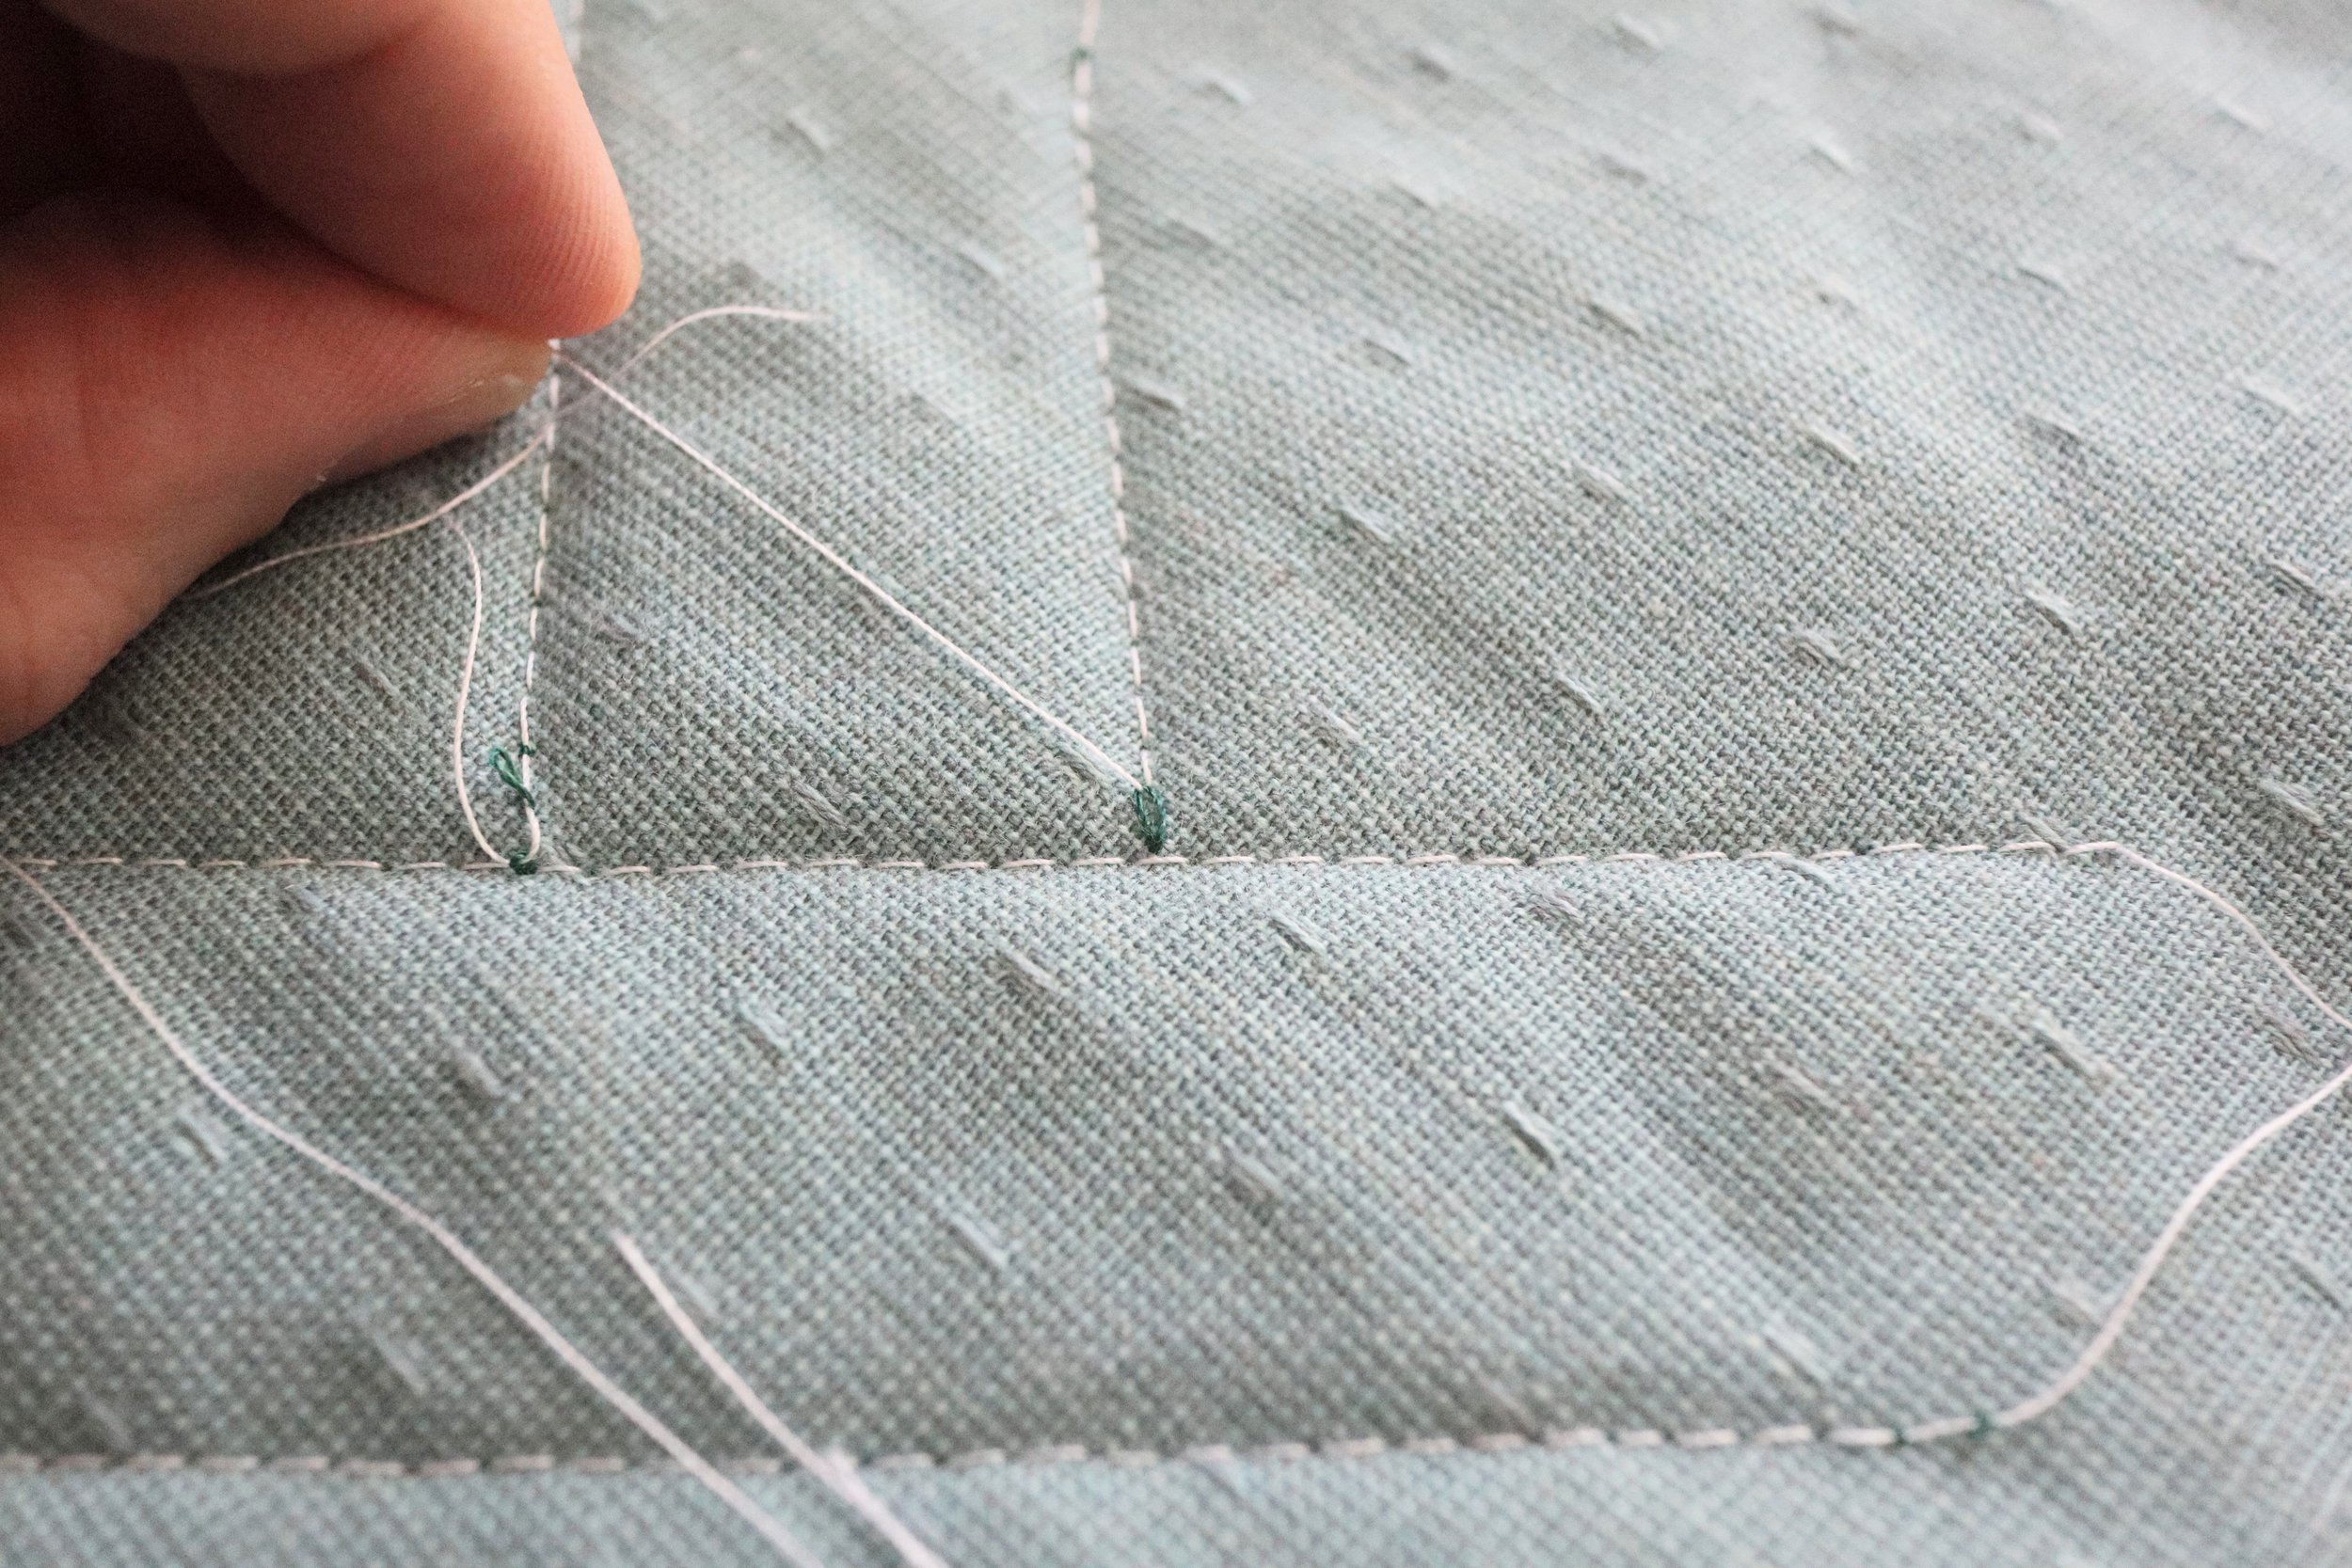 Pull the top thread until you see a small loop.